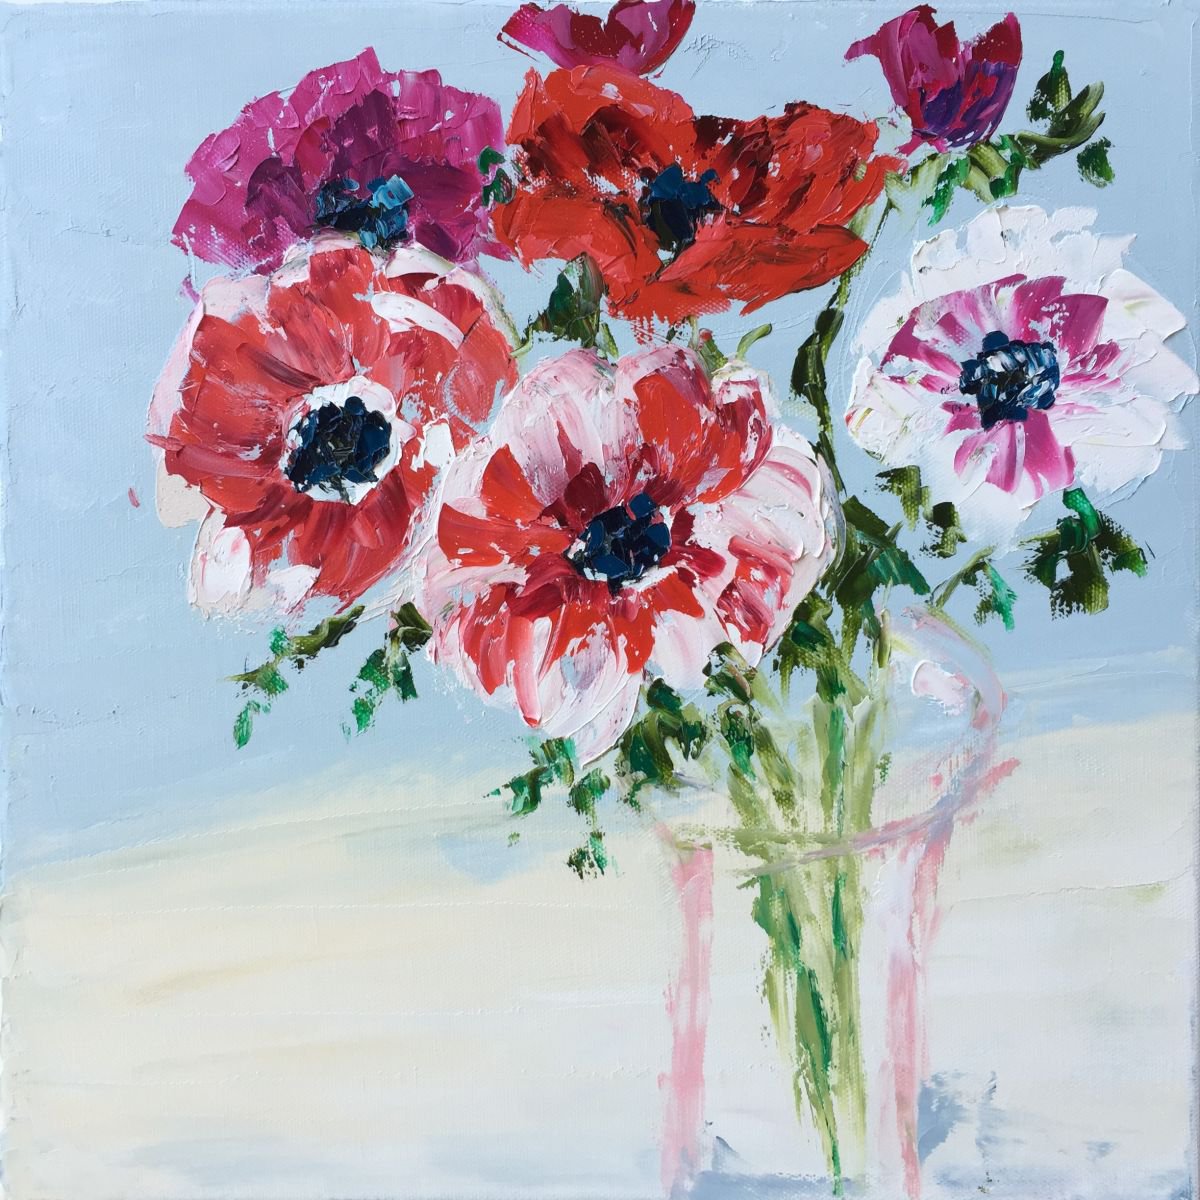 Vase of Poppies 14x14 by Emma Bell